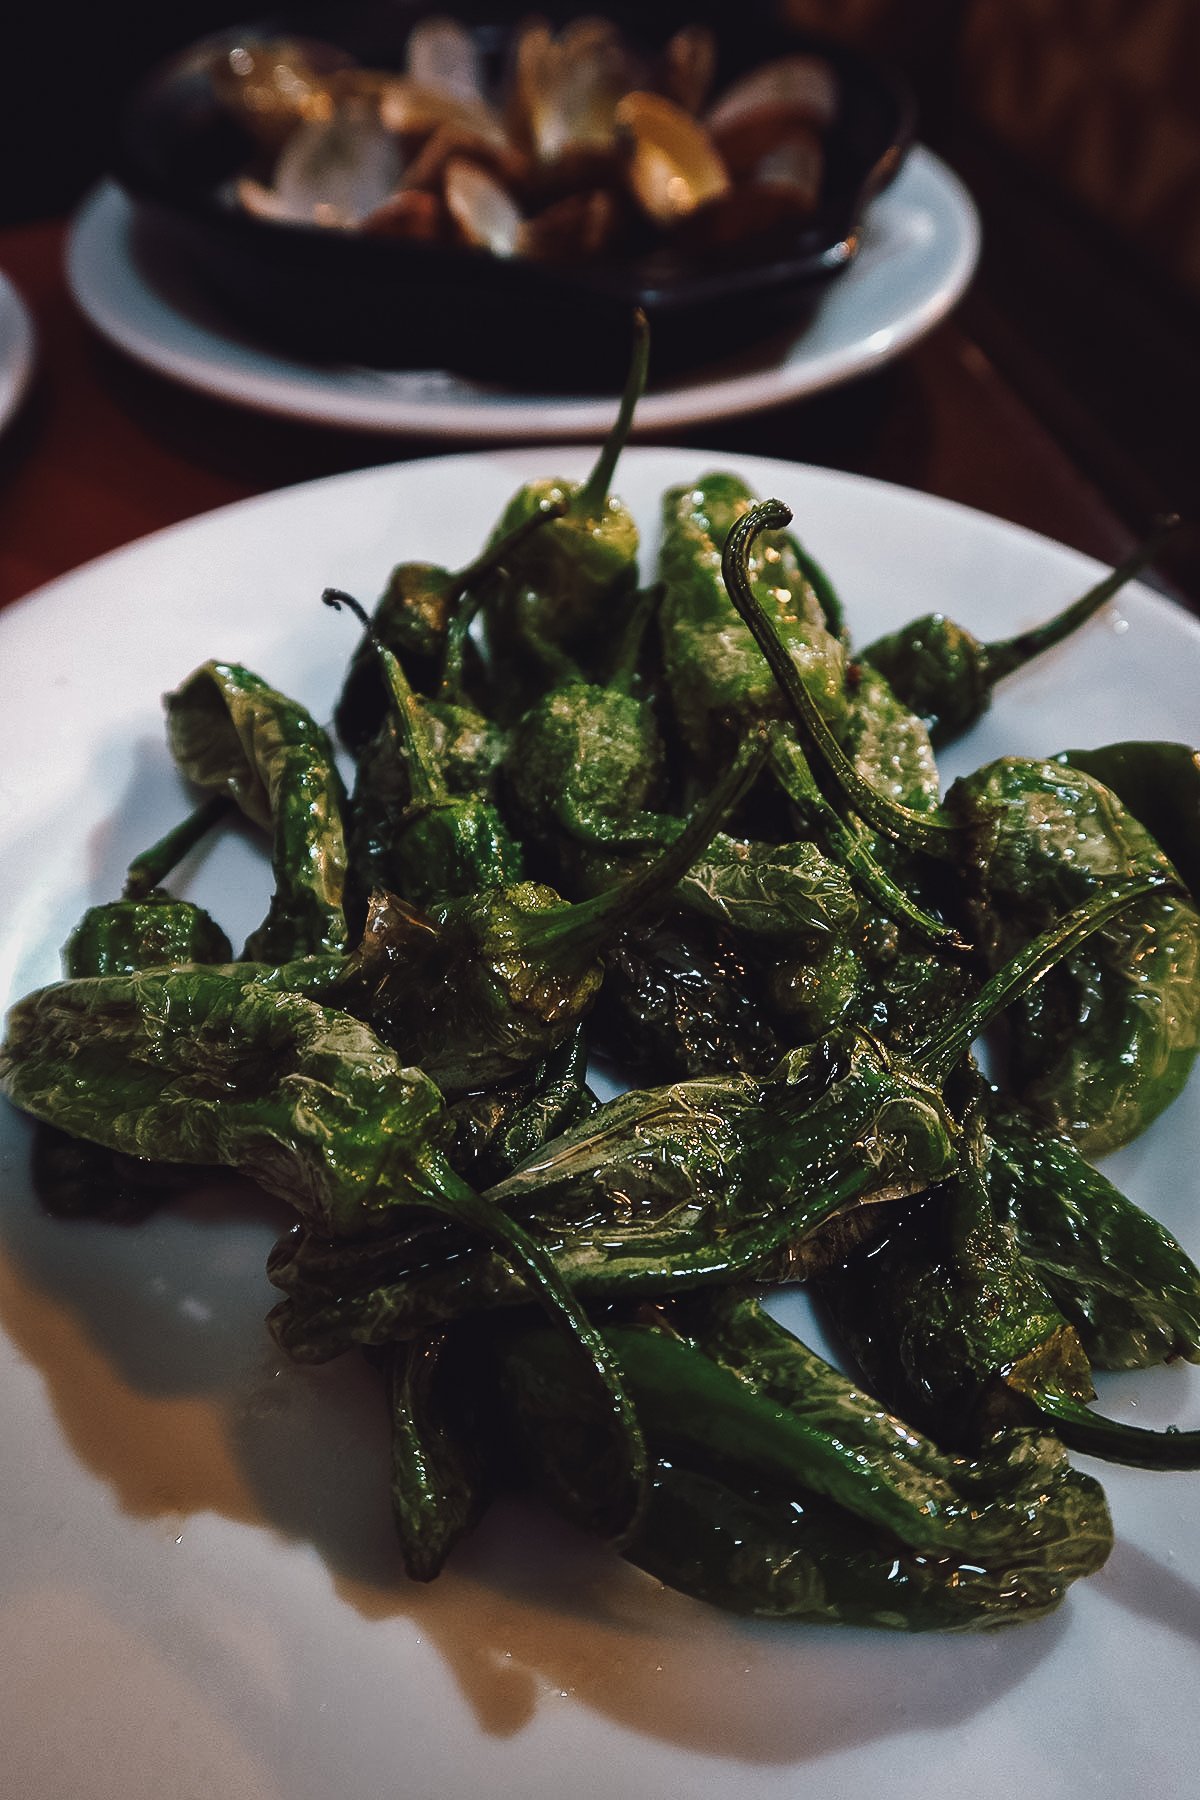 Padron peppers at a restaurant in Barcelona